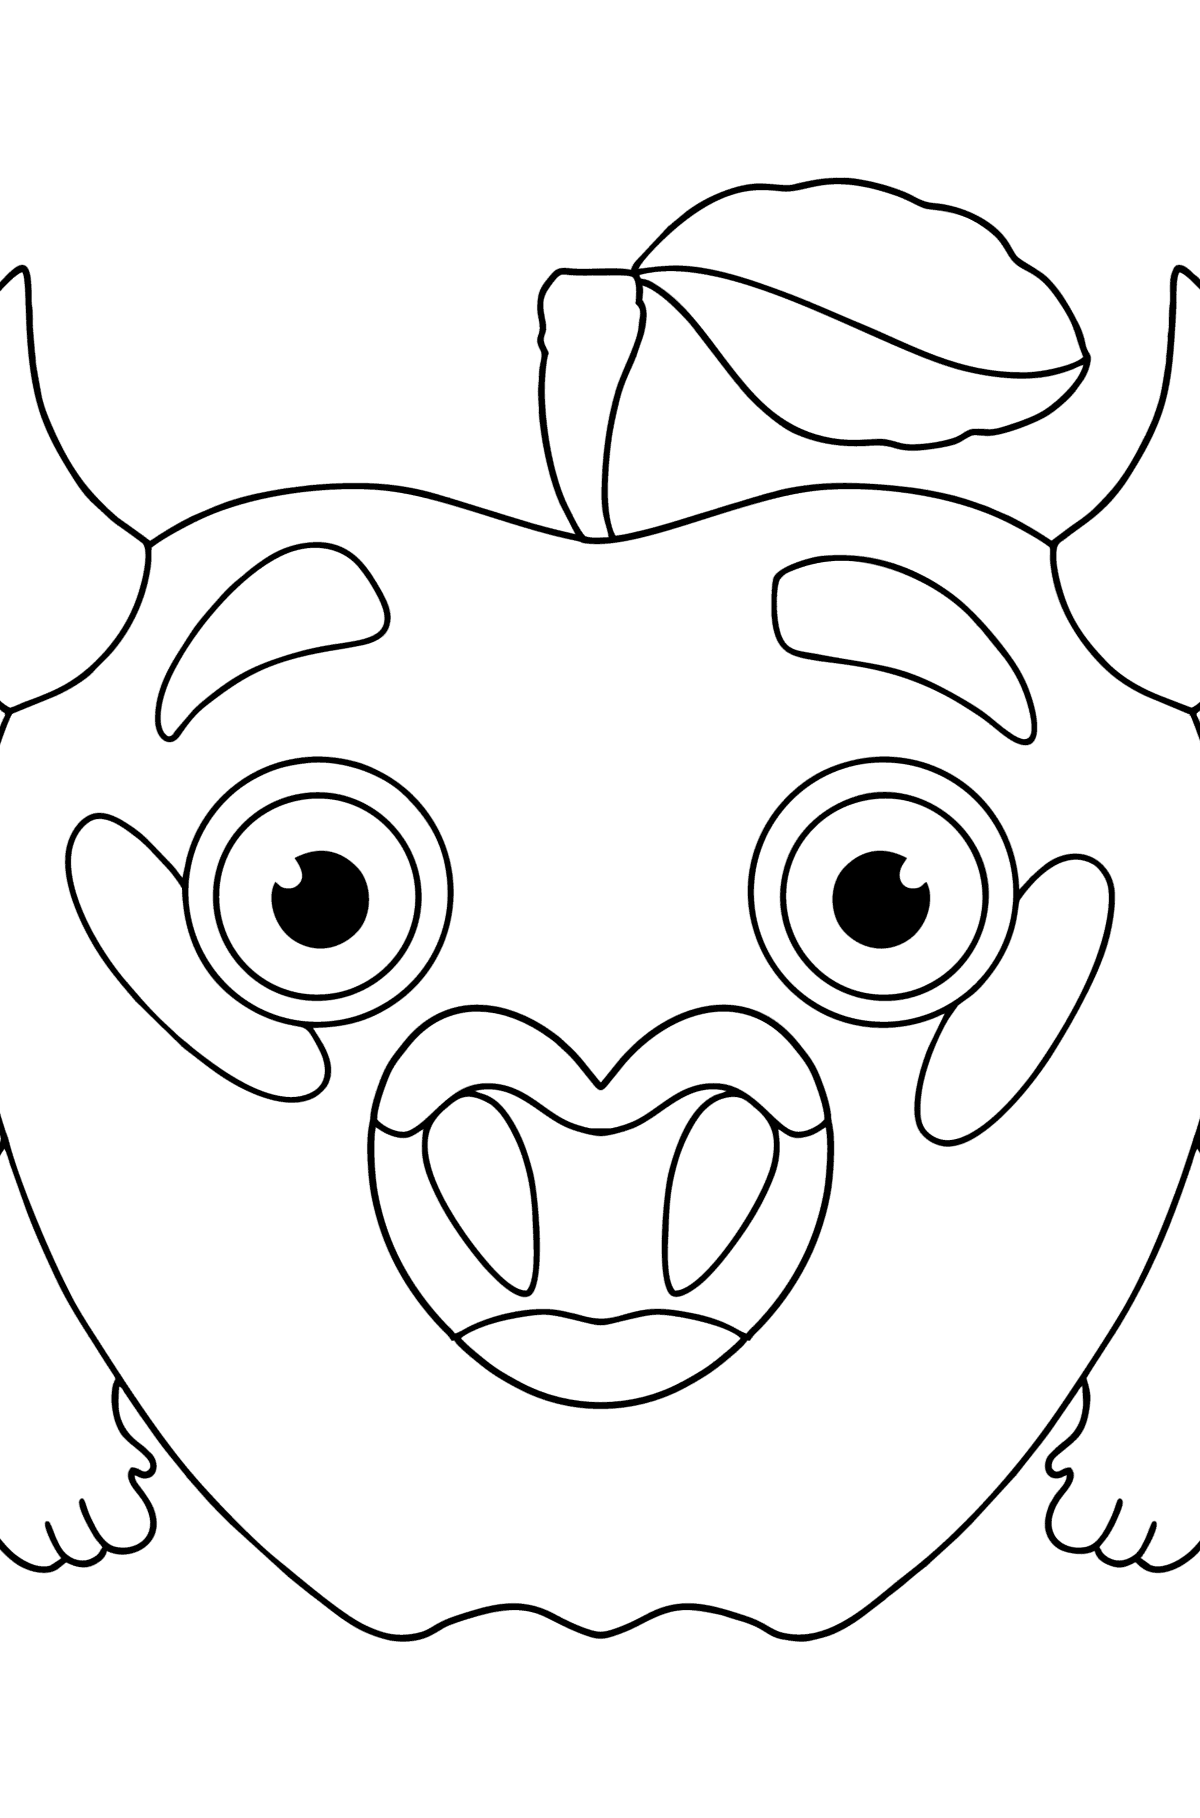 Good mister apple сoloring page - Coloring Pages for Kids